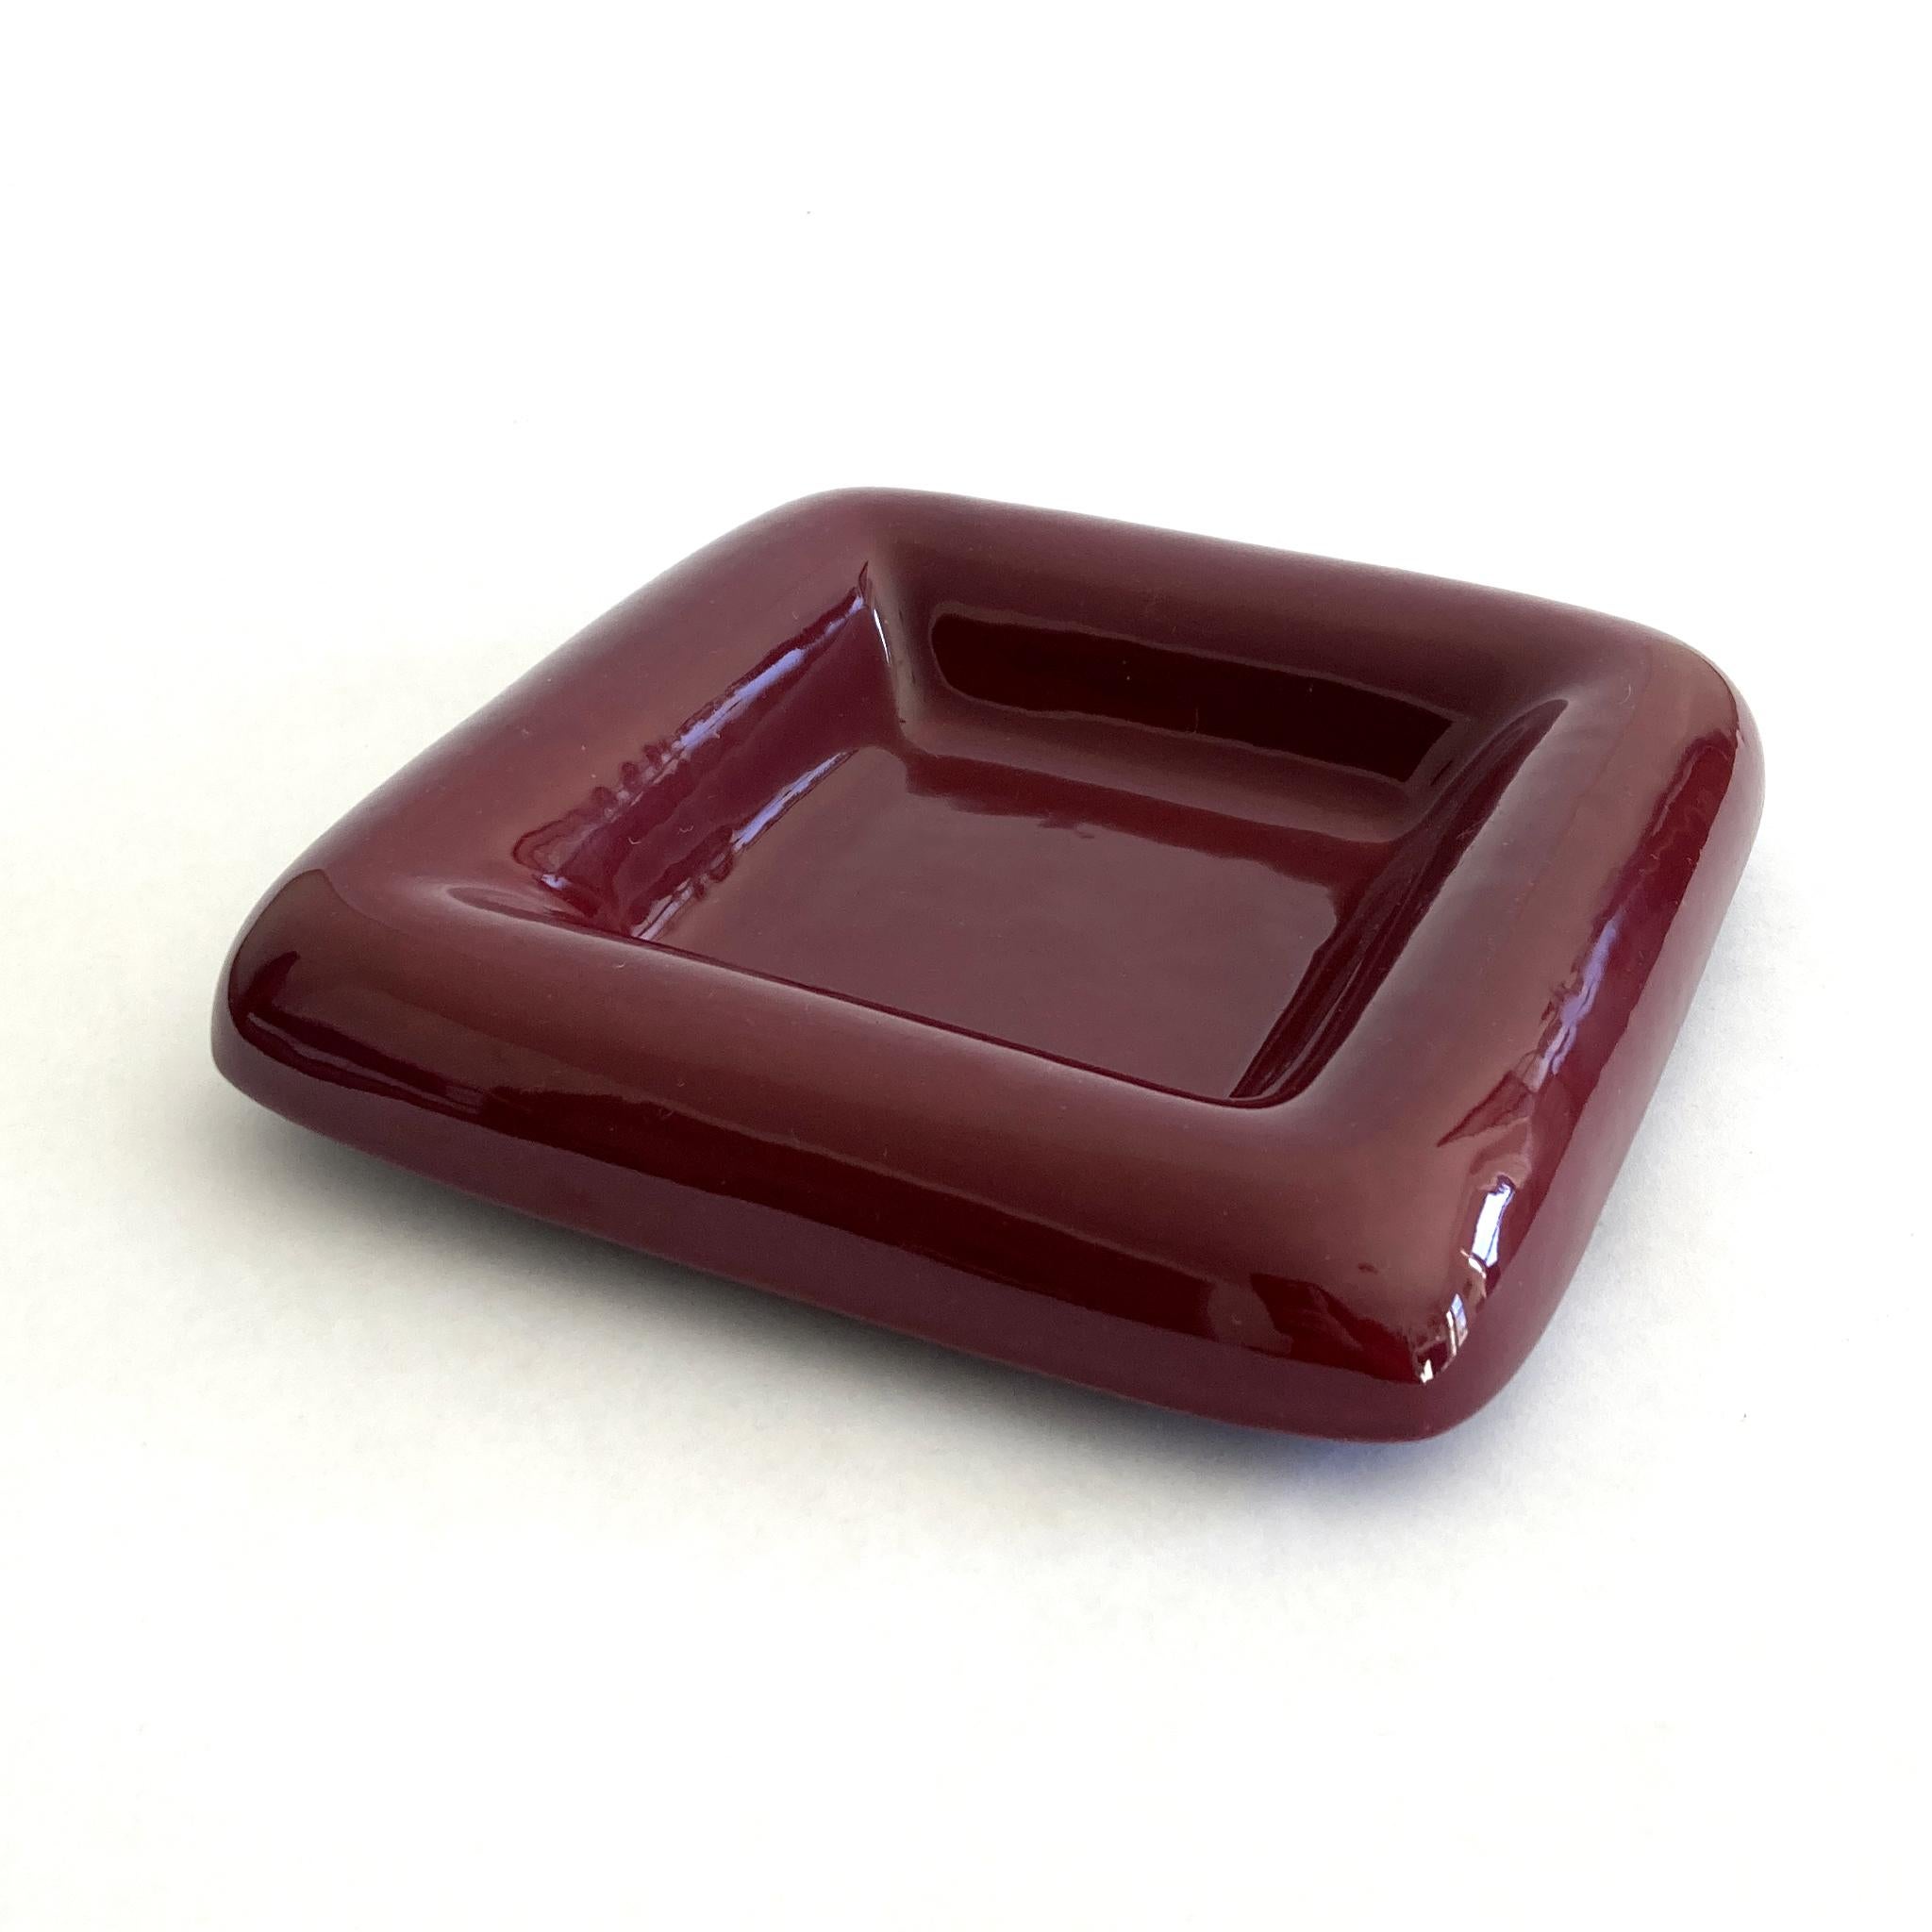 Postmodern Haeger vide poche catchall. Bold rounded edges make this a standout piece, burgundy color is versatile and pairs nicely with many other colors. Perfect for a coffee table, dresser or entryway. Marked Haeger USA on bottom, pattern number